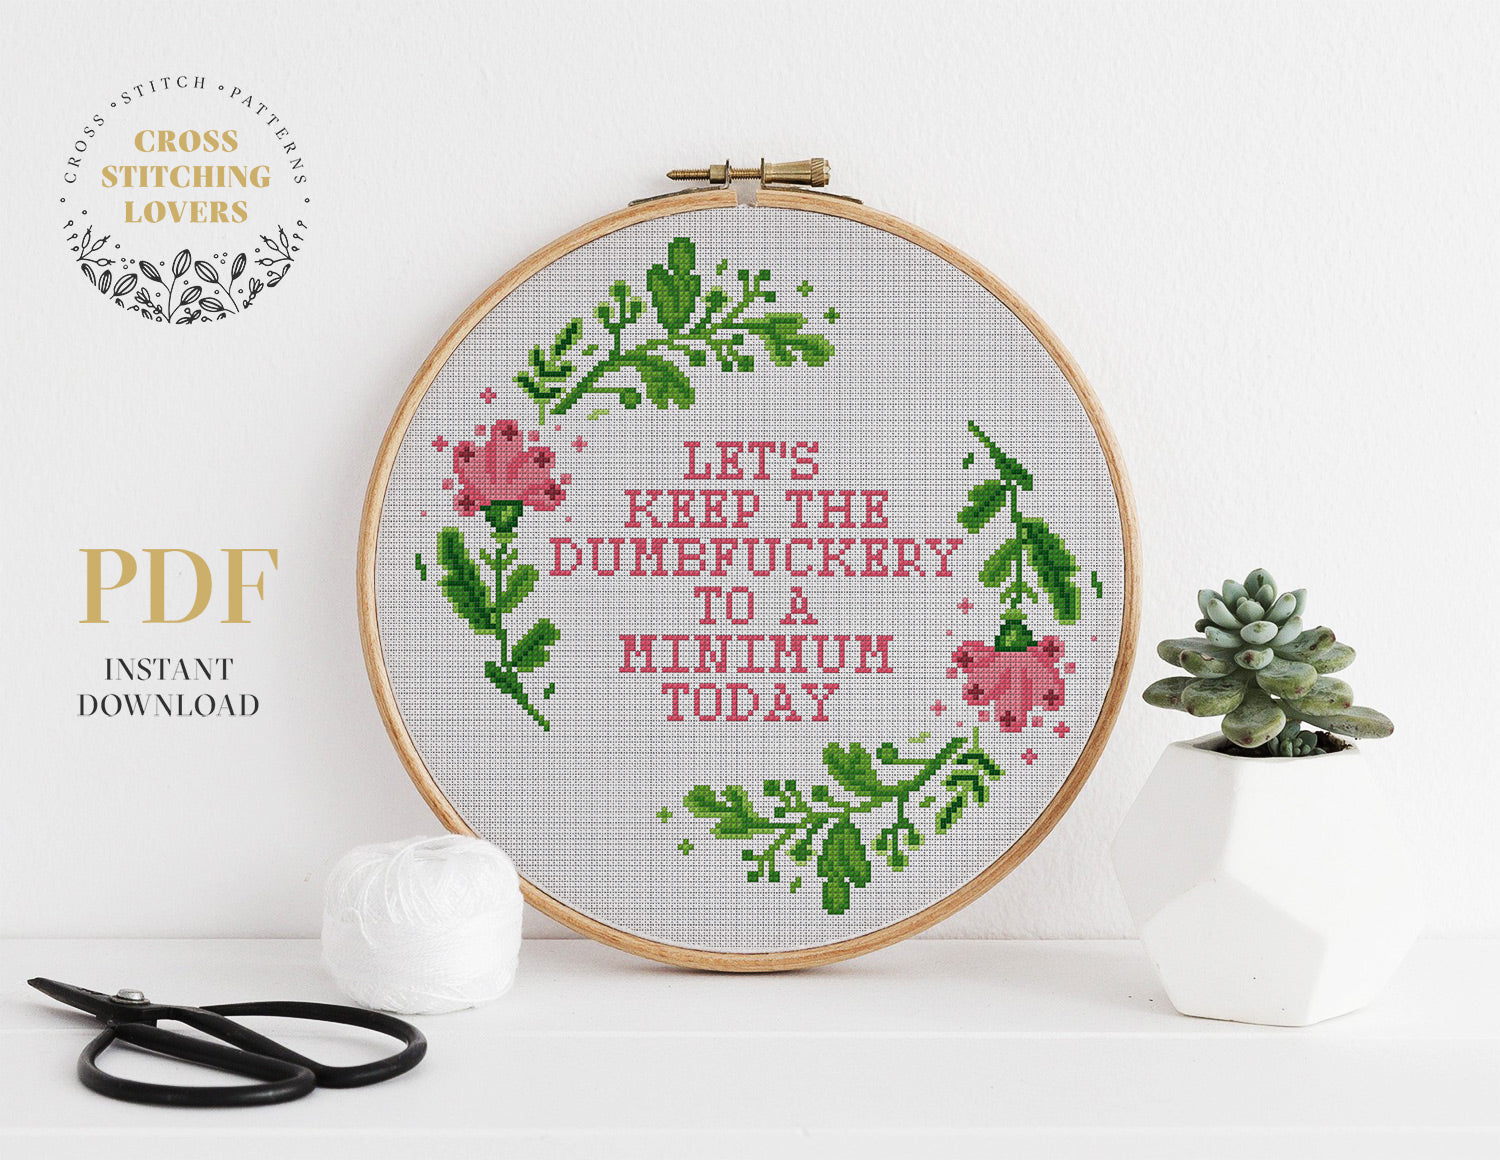 LET'S KEEP THE DUMBFUCKERY TO A MINIMUM TODAY  -  Funny Cross stitch pattern